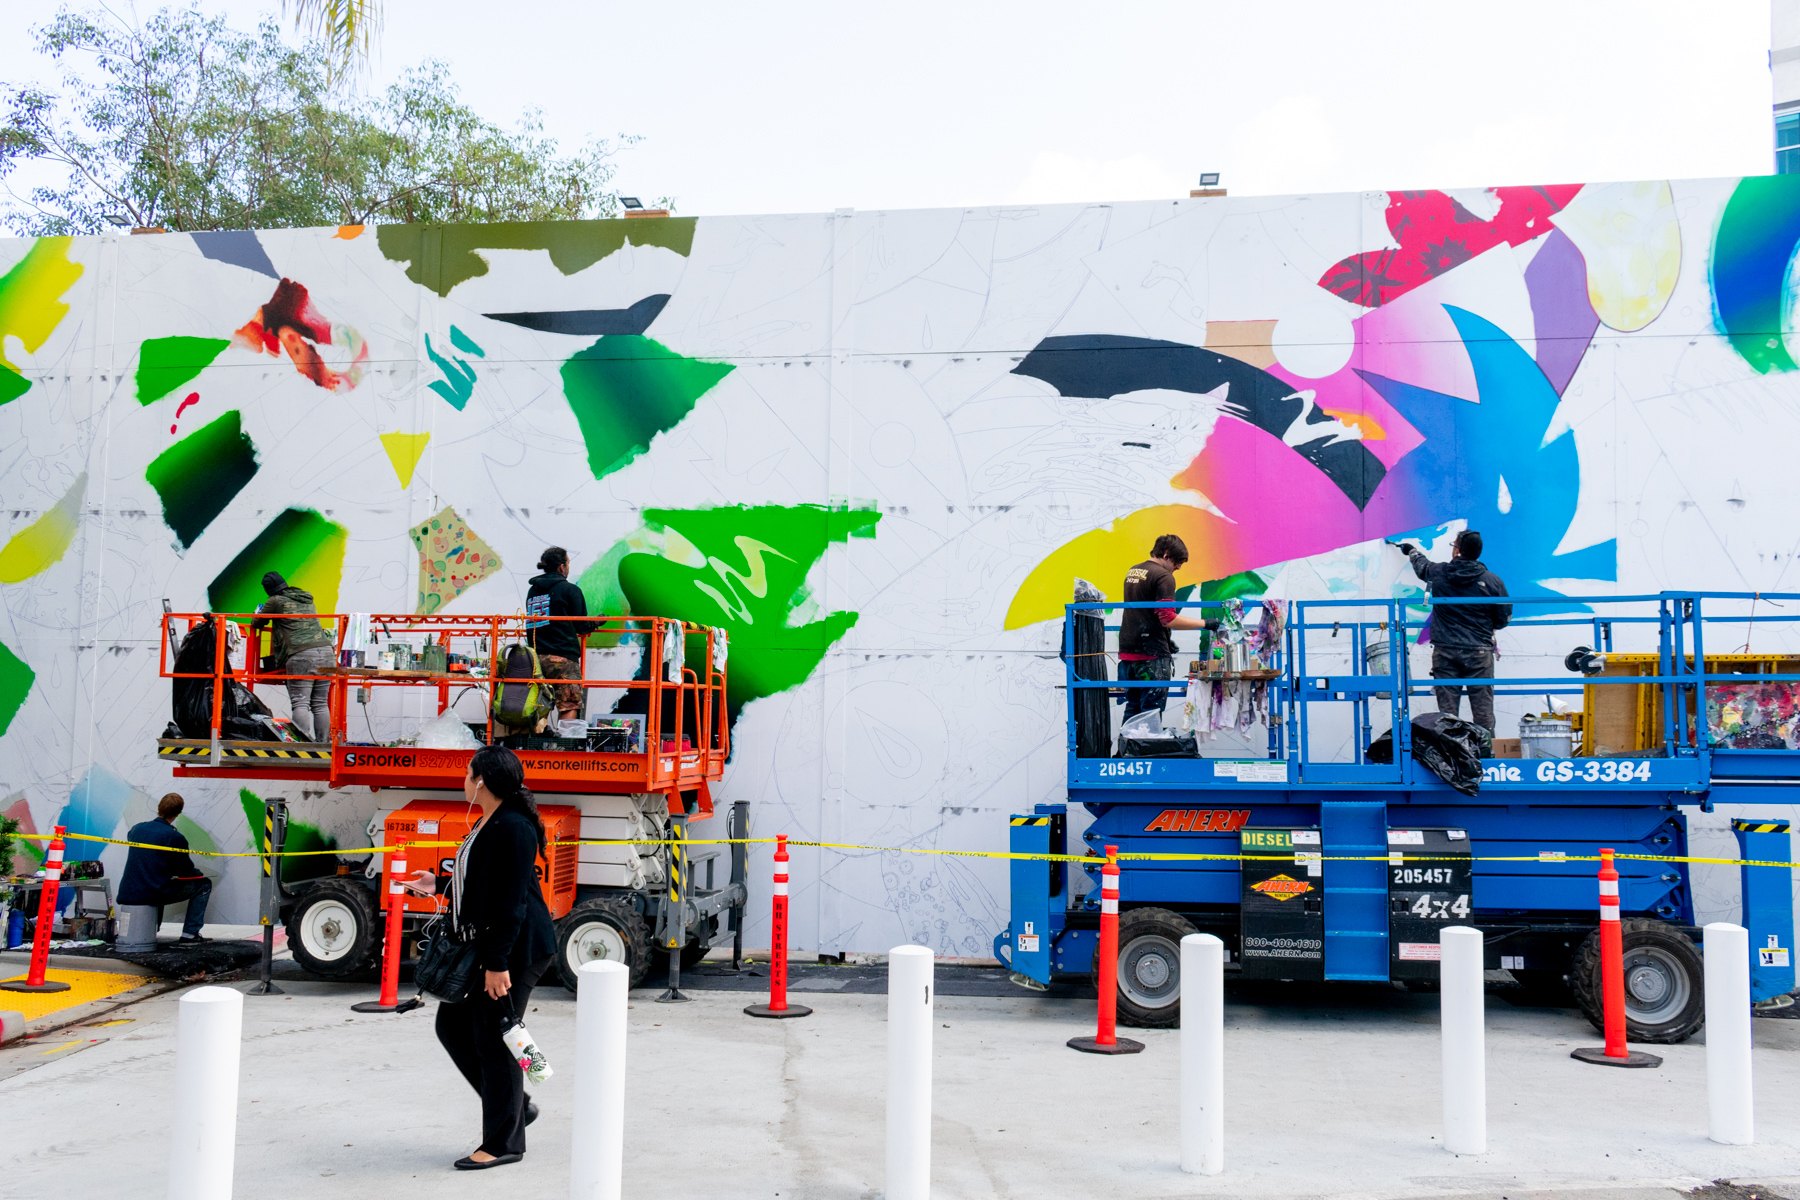 Colossal Media hand painted a mural created by artist Matsu for the City of Beverly Hills.